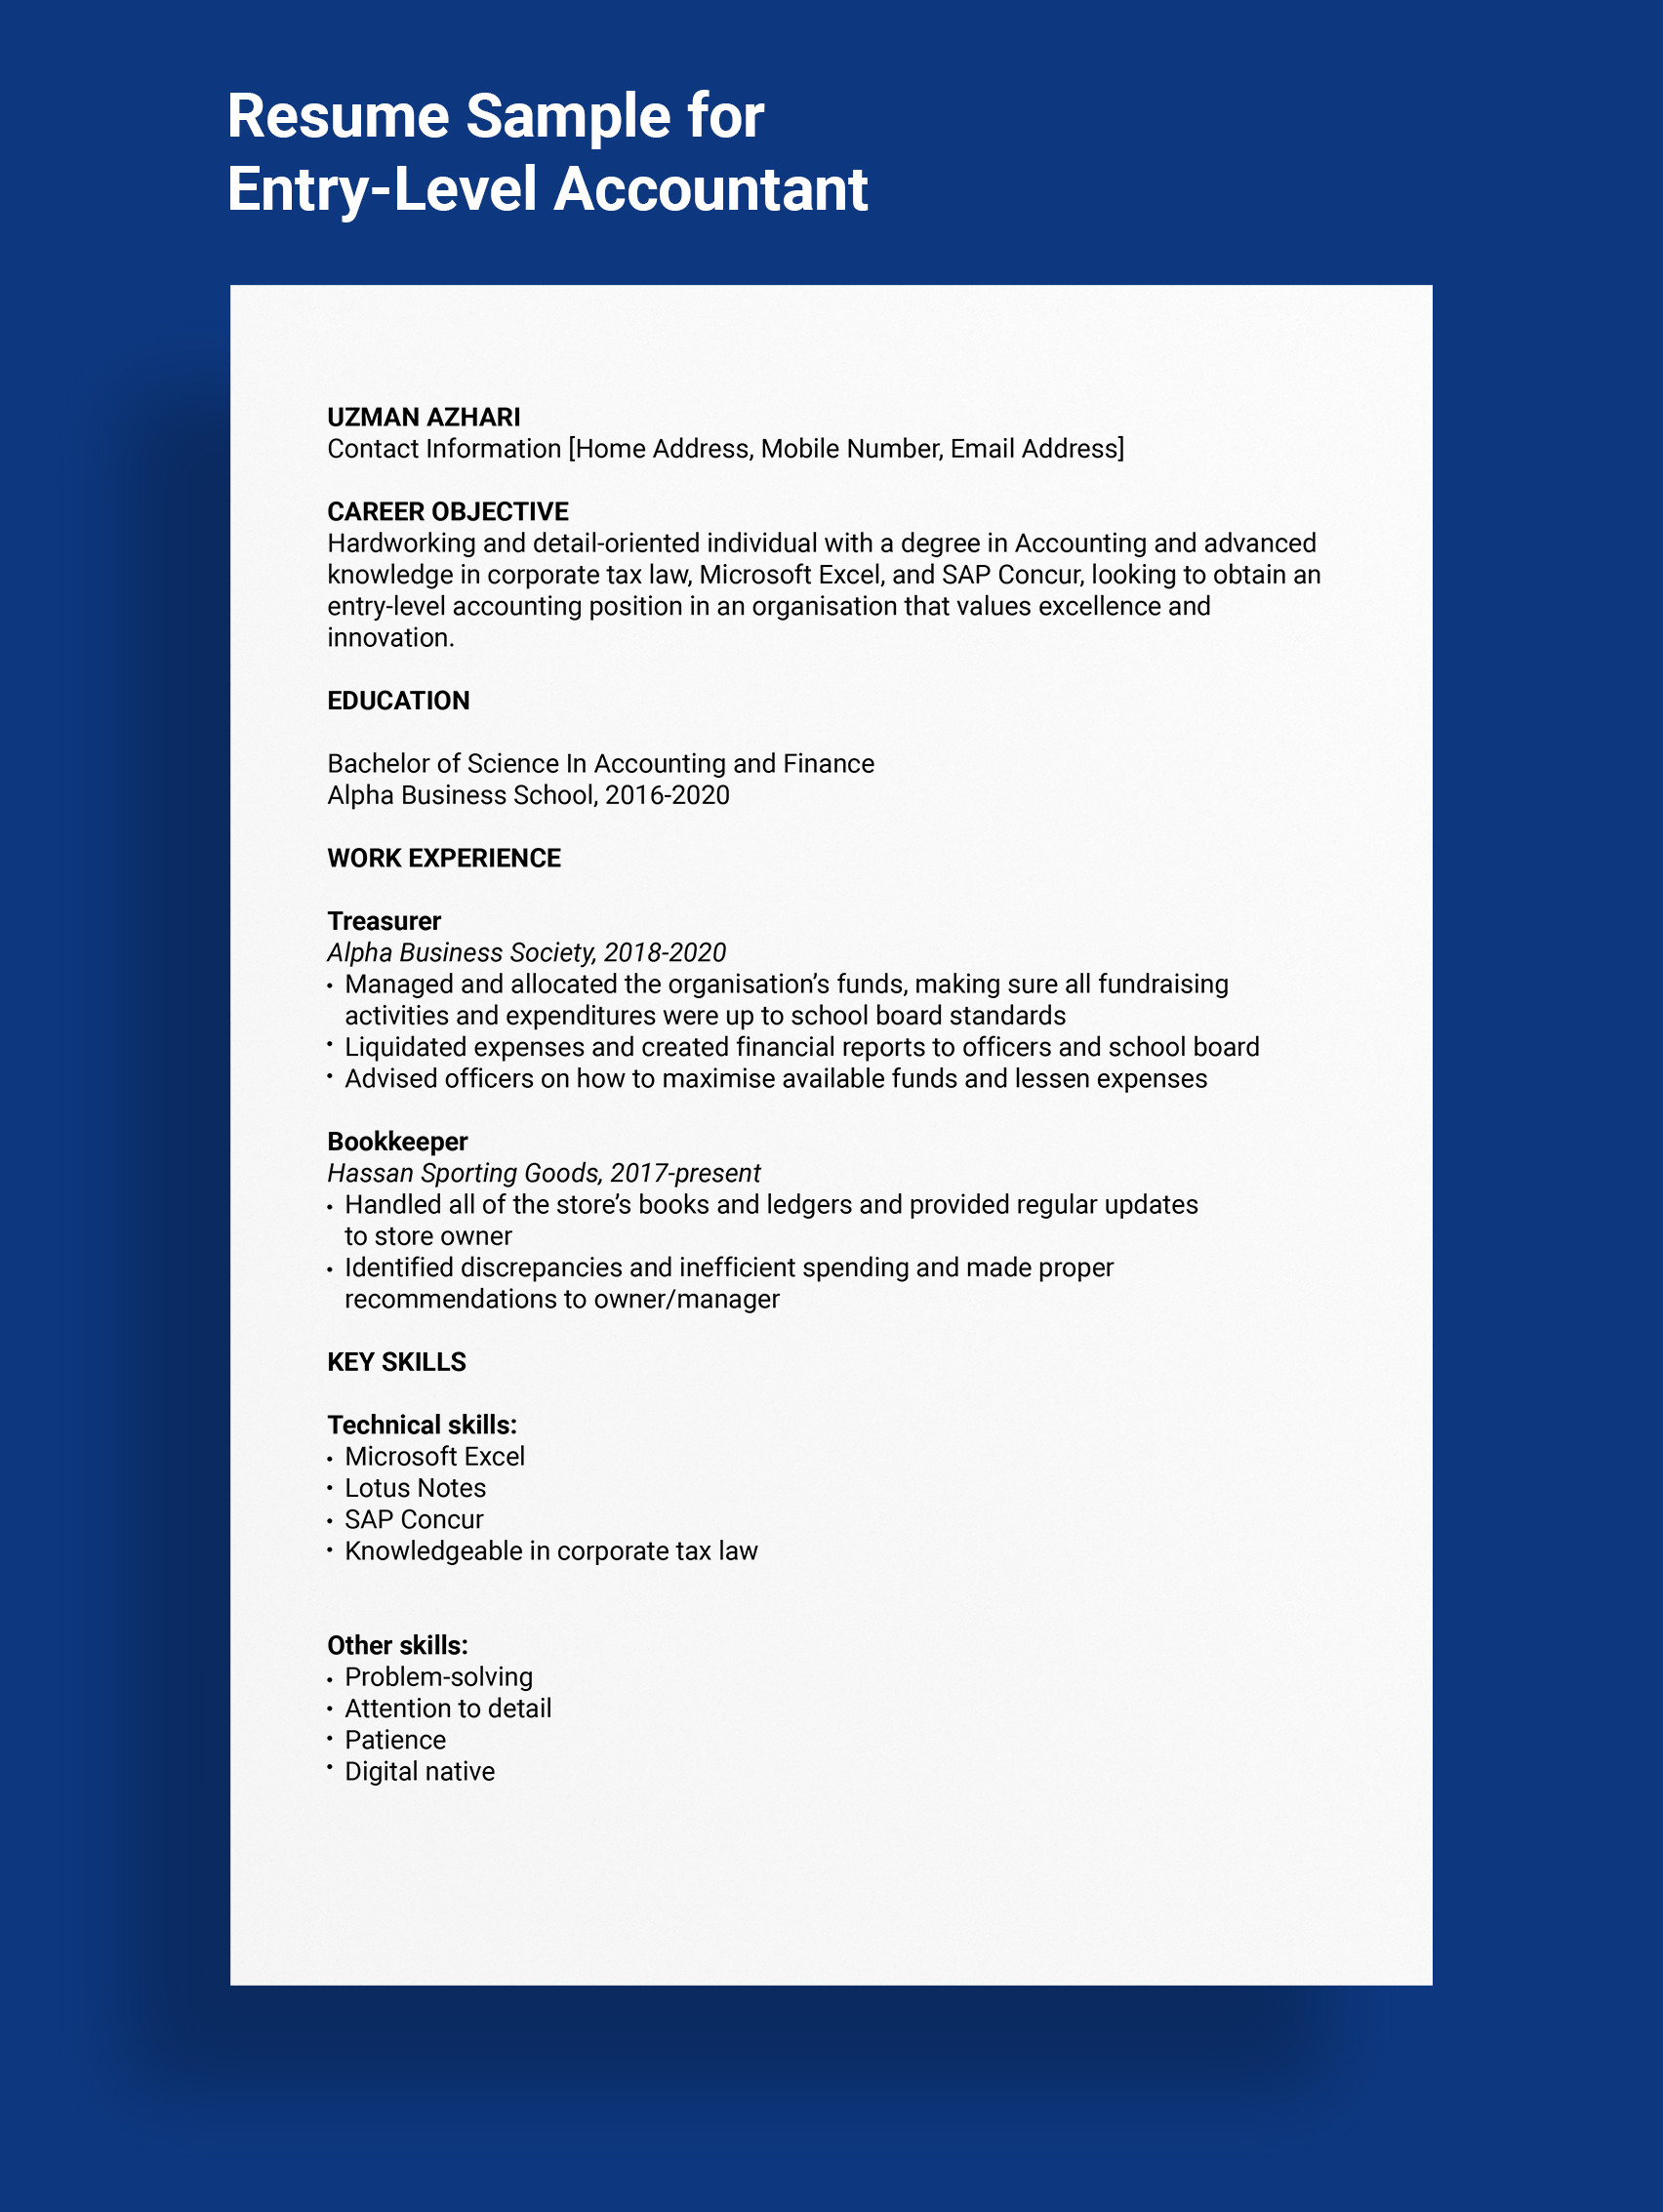 Sample Resume for Accounting Position with No Experience 3 Things You Need to Have In Your Entry-level Accountant Resume …